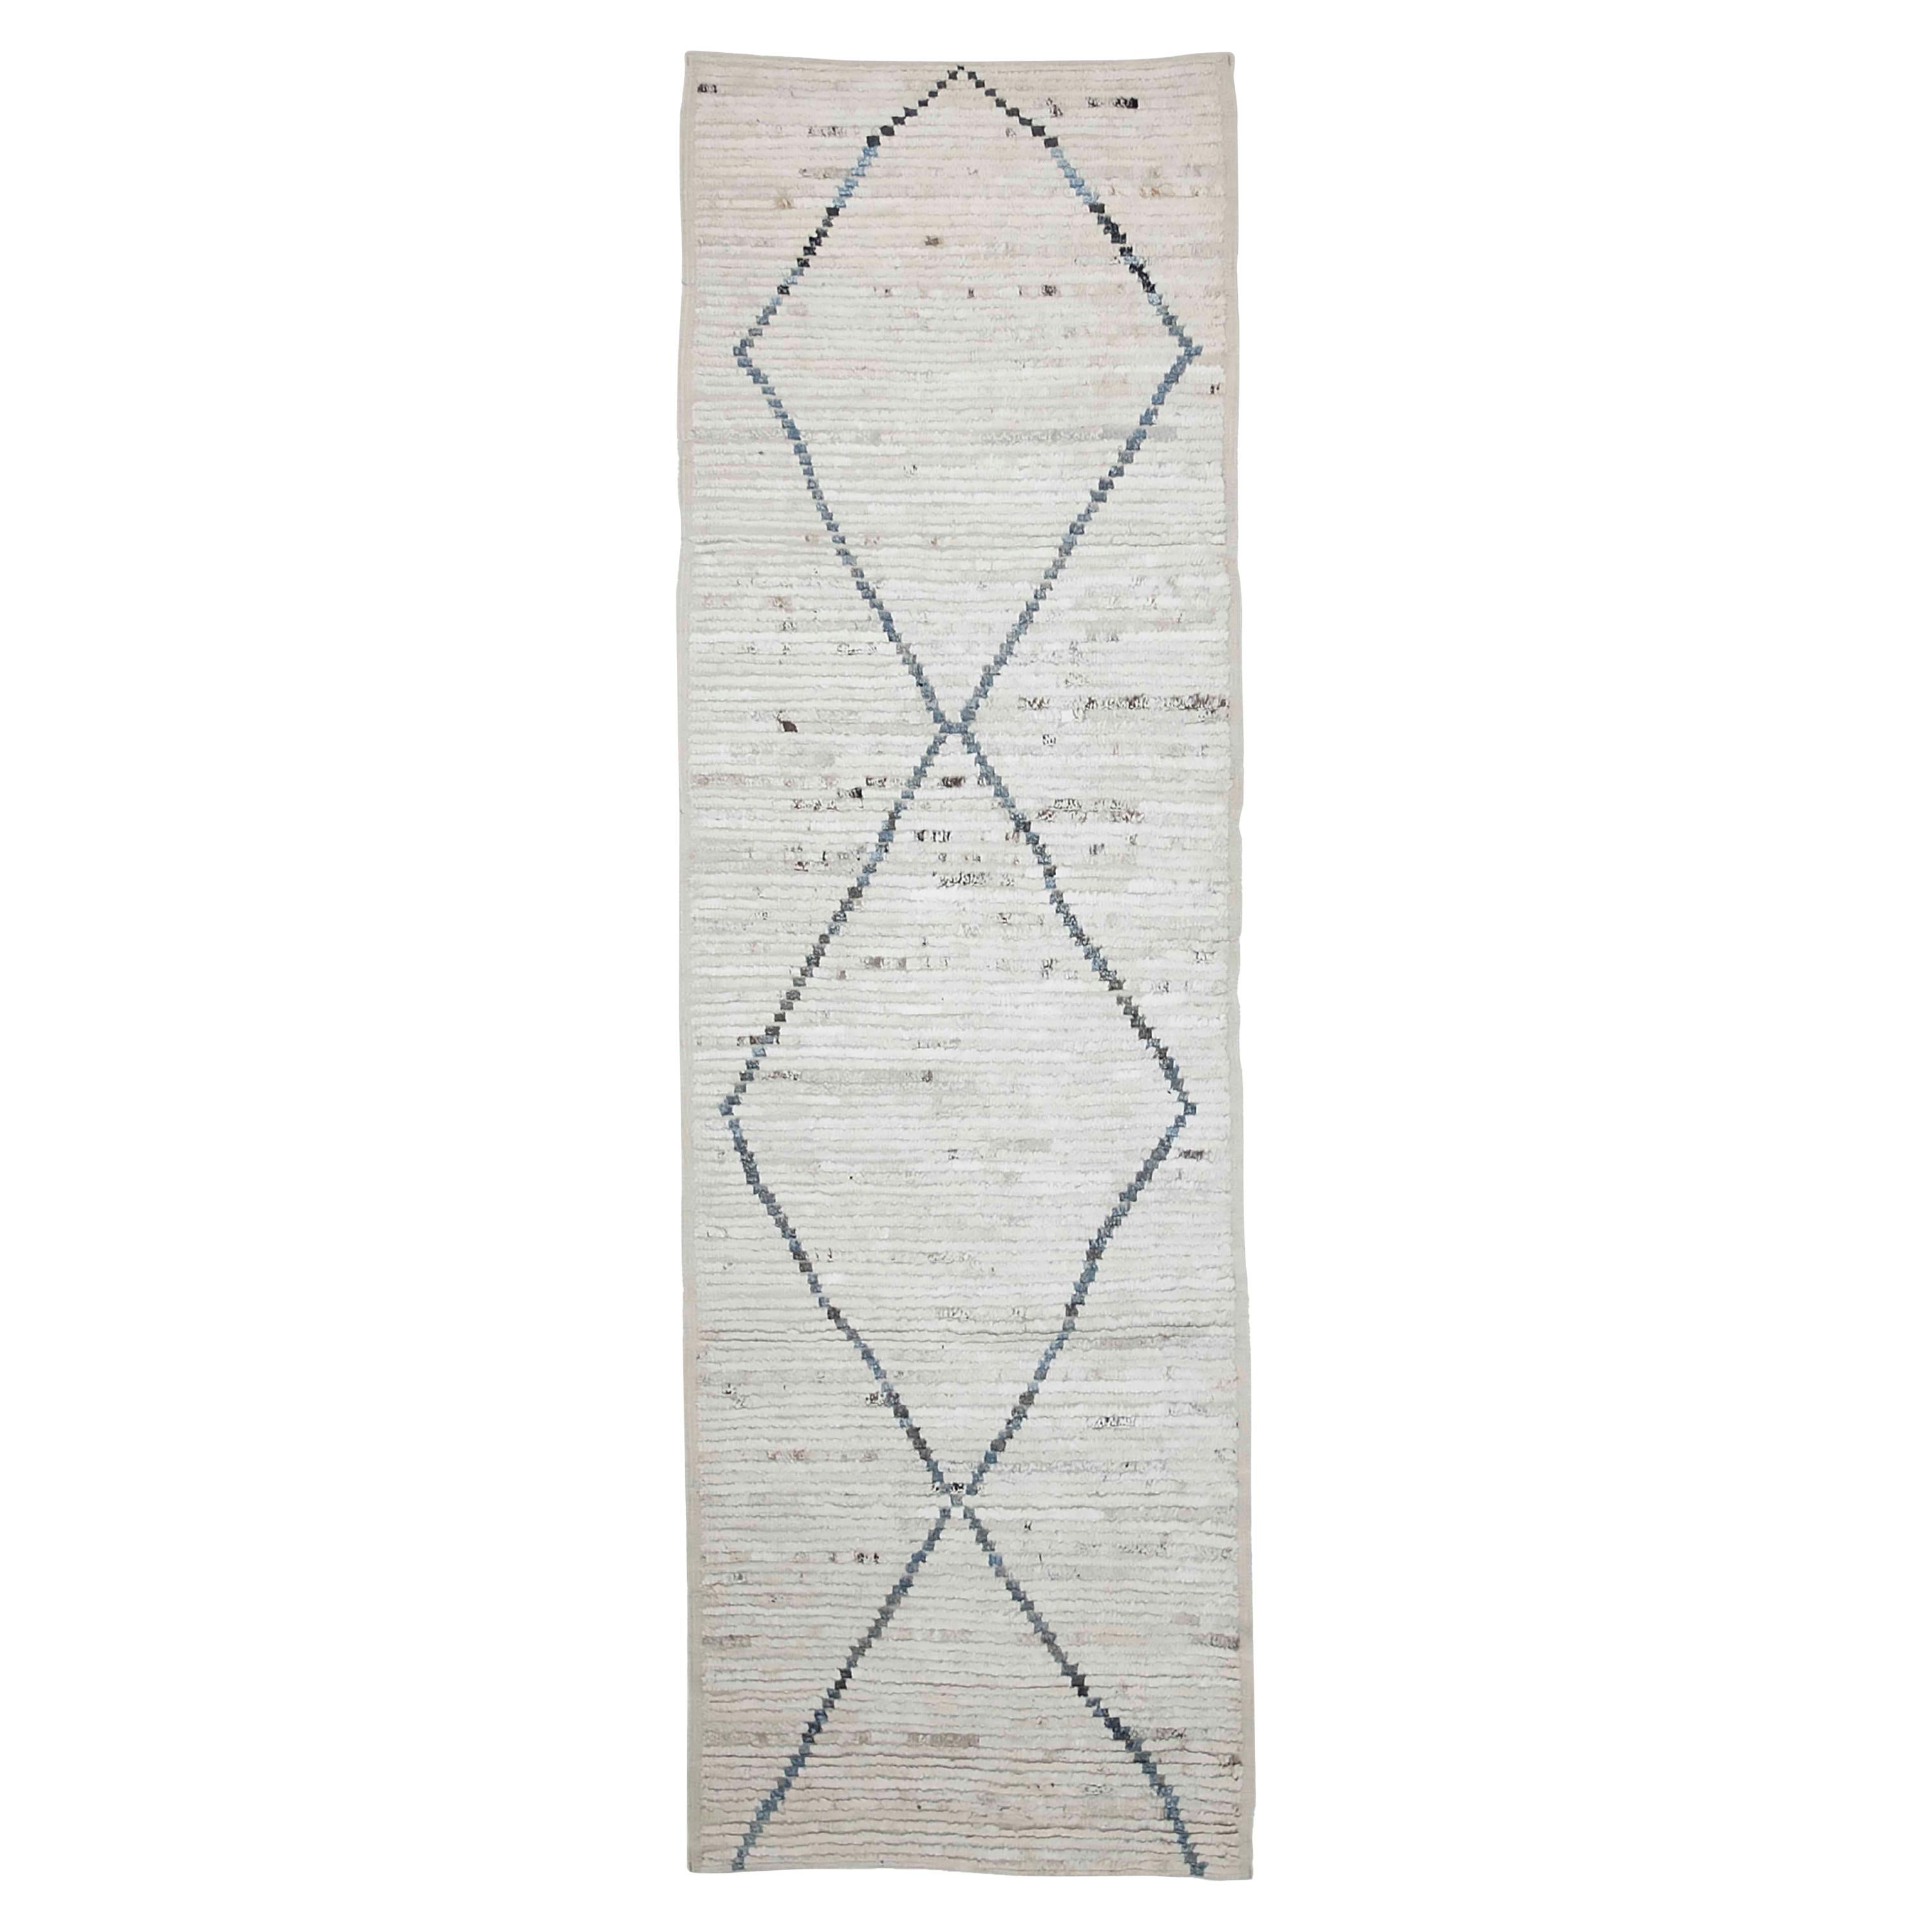 Afghan Moroccan Style Runner Rug in Ivory with Gray and Blue Diamond Details